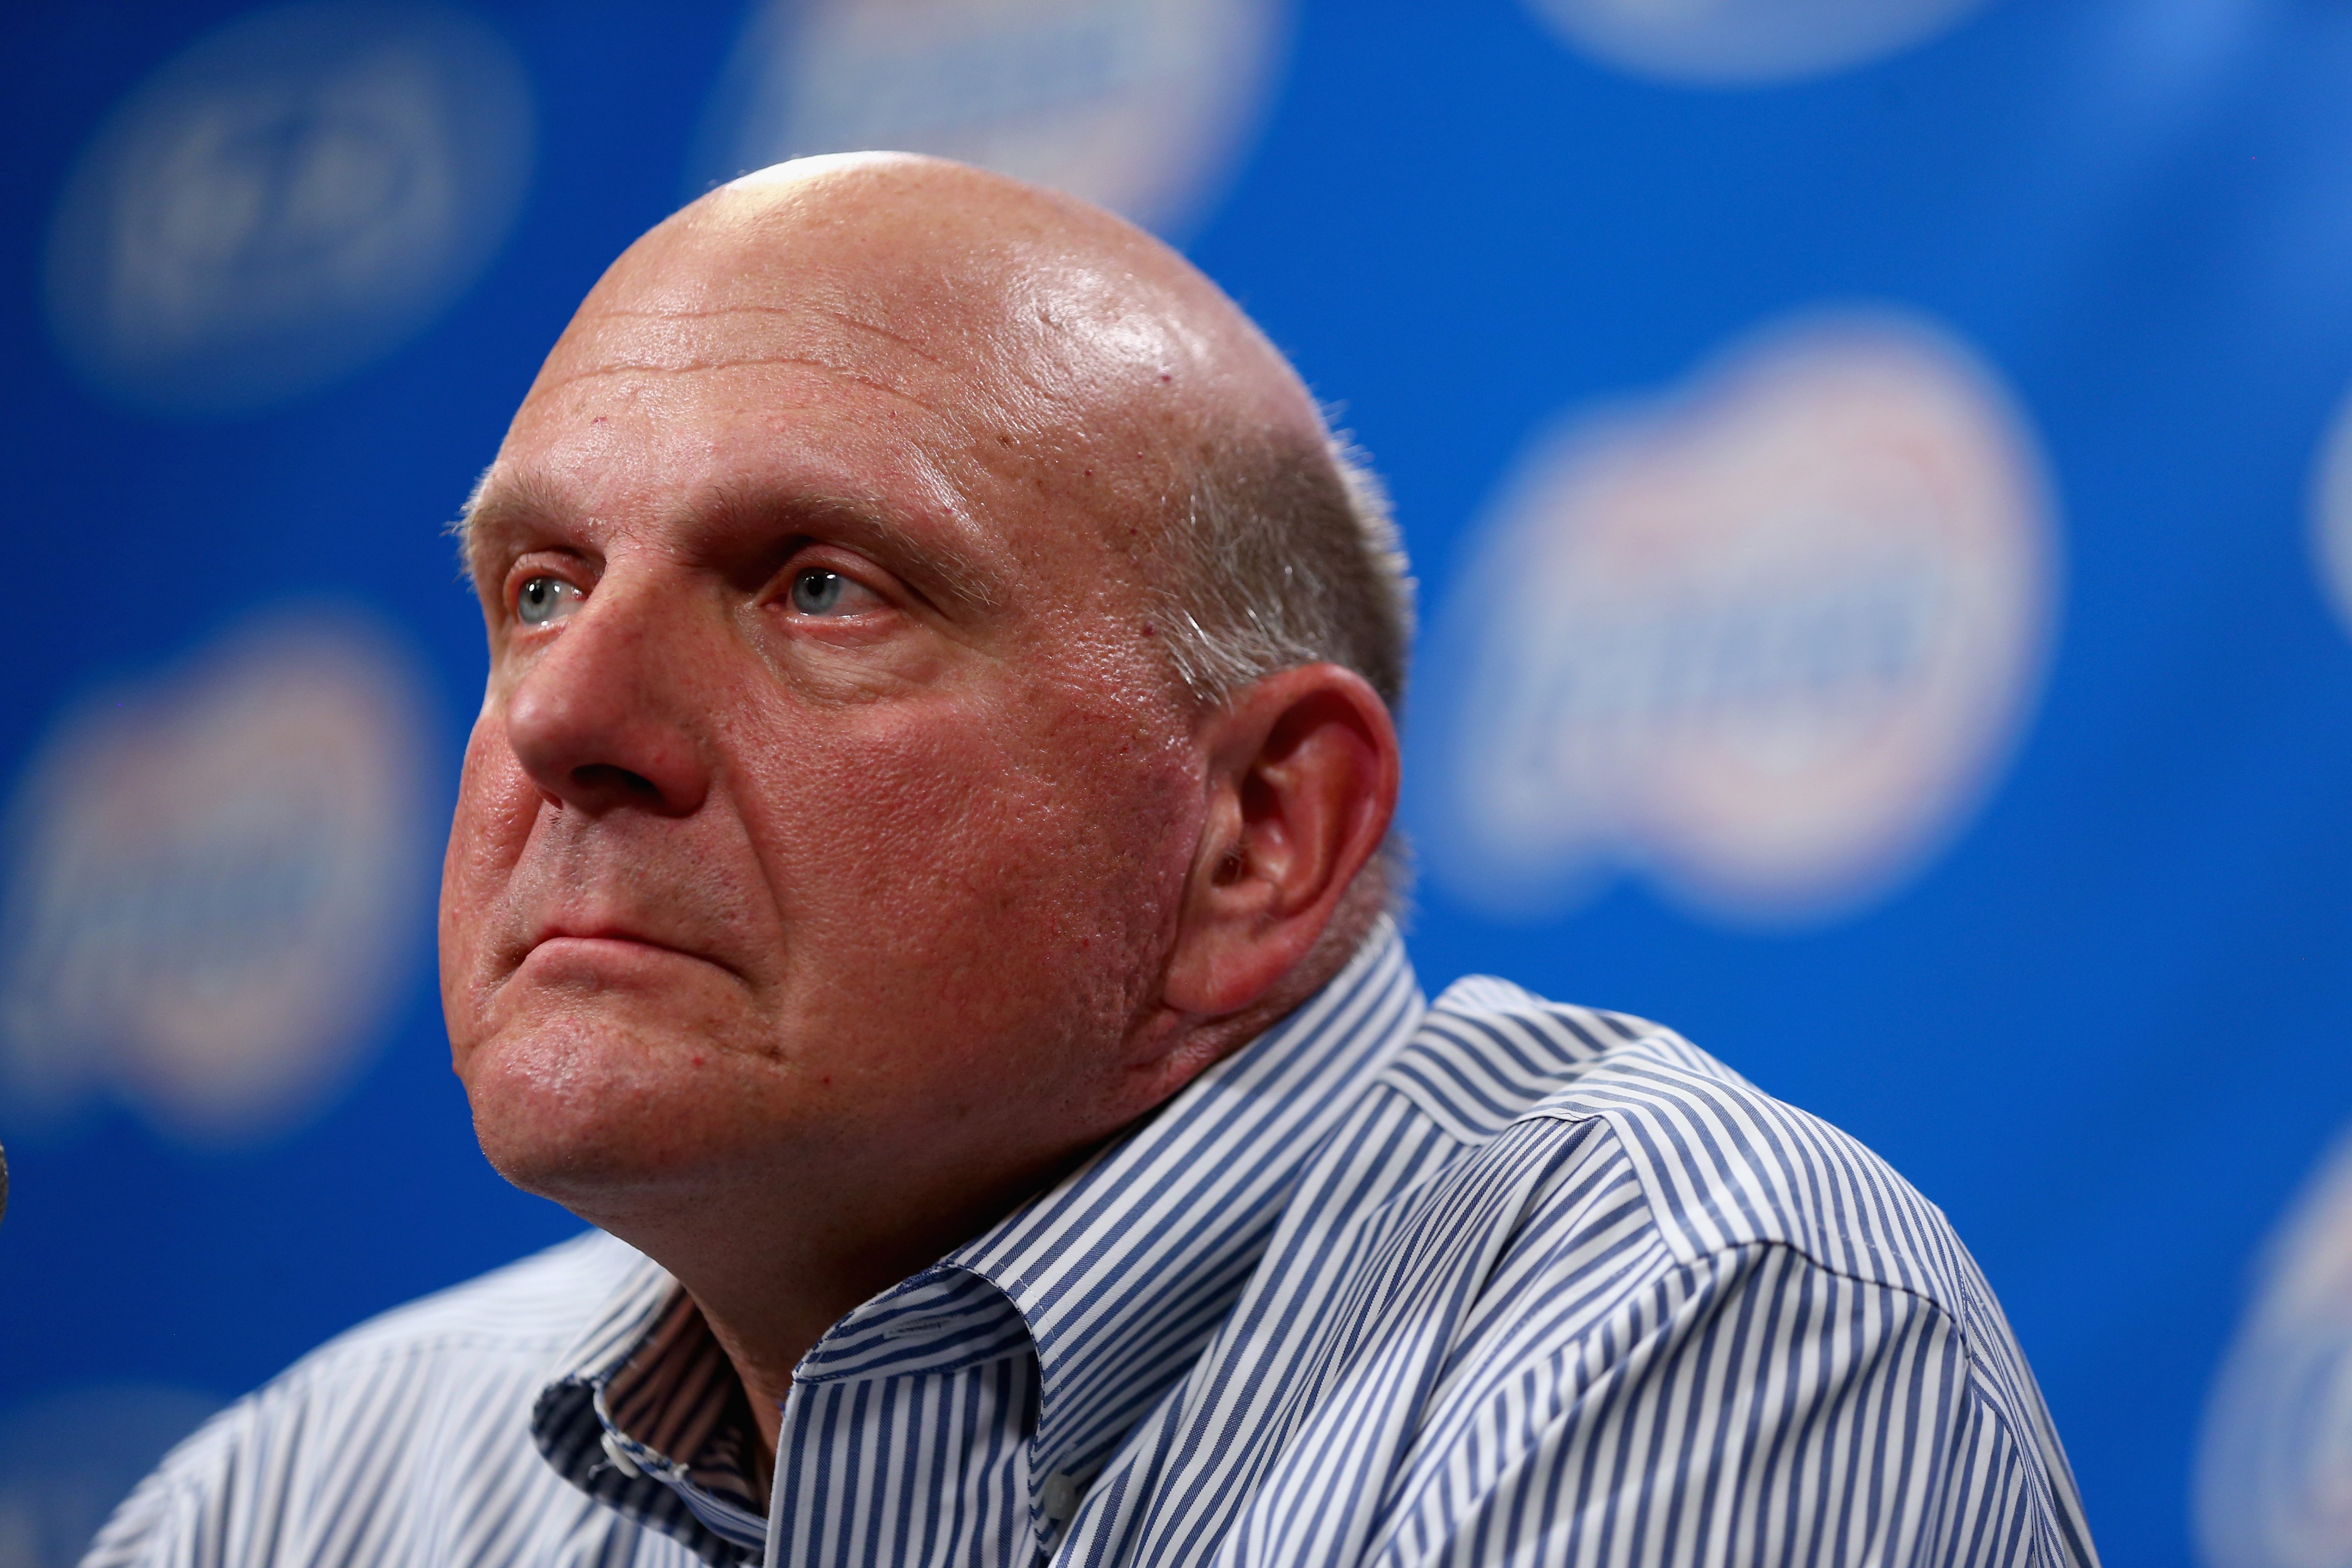 The new owner of the Los Angeles Clippers, Steve Ballmer, addresses the media after being introduced for the first time during the Los Angeles Clippers Fan Festival on August 18, 2014, in Los Angeles (Jeff Gross—Getty Images)